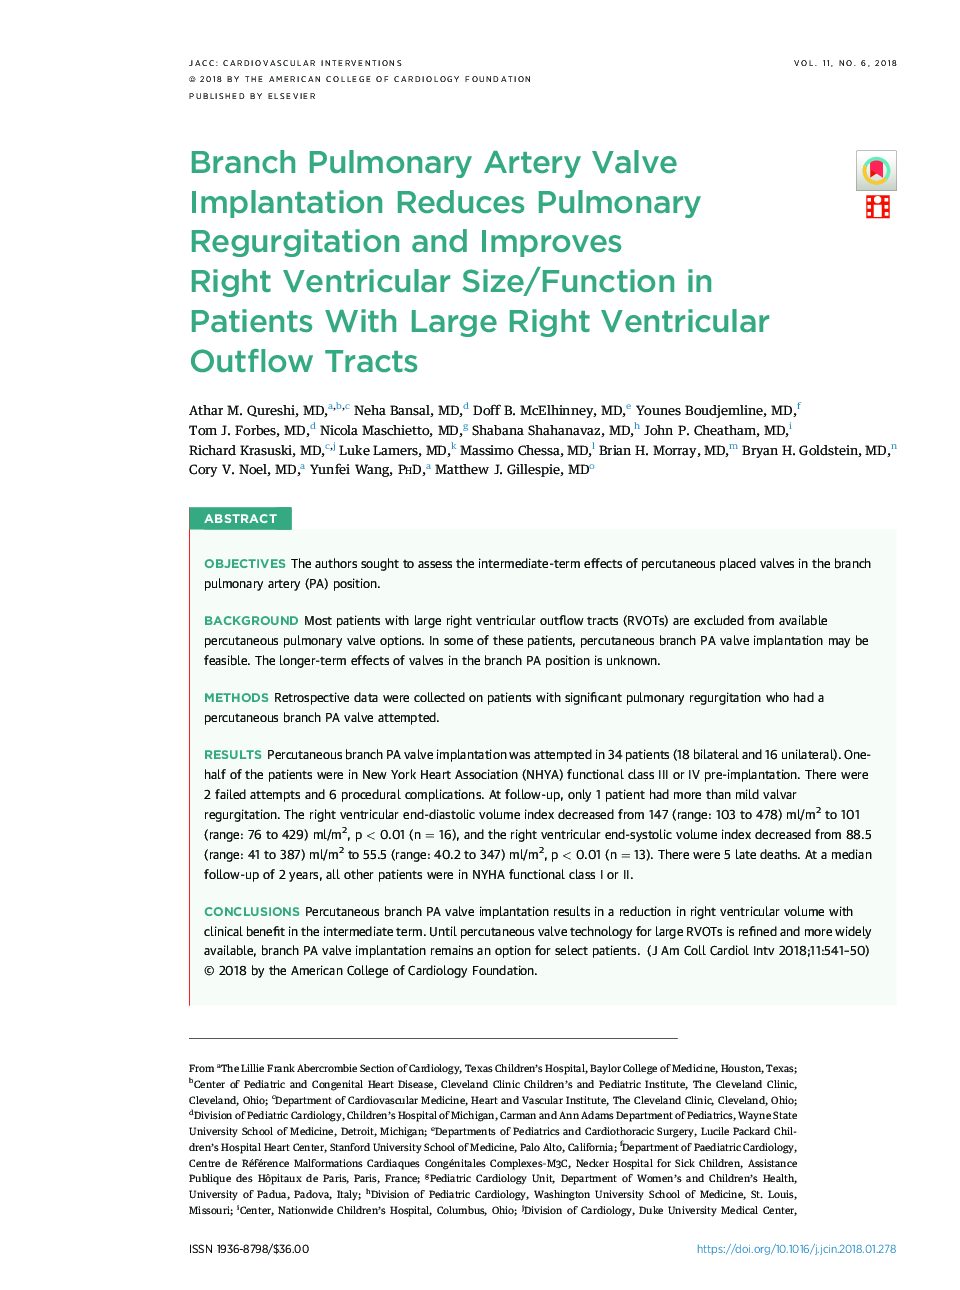 Branch Pulmonary Artery Valve Implantation Reduces Pulmonary Regurgitation and Improves Right Ventricular Size/Function in Patients With Large Right Ventricular Outflow Tracts